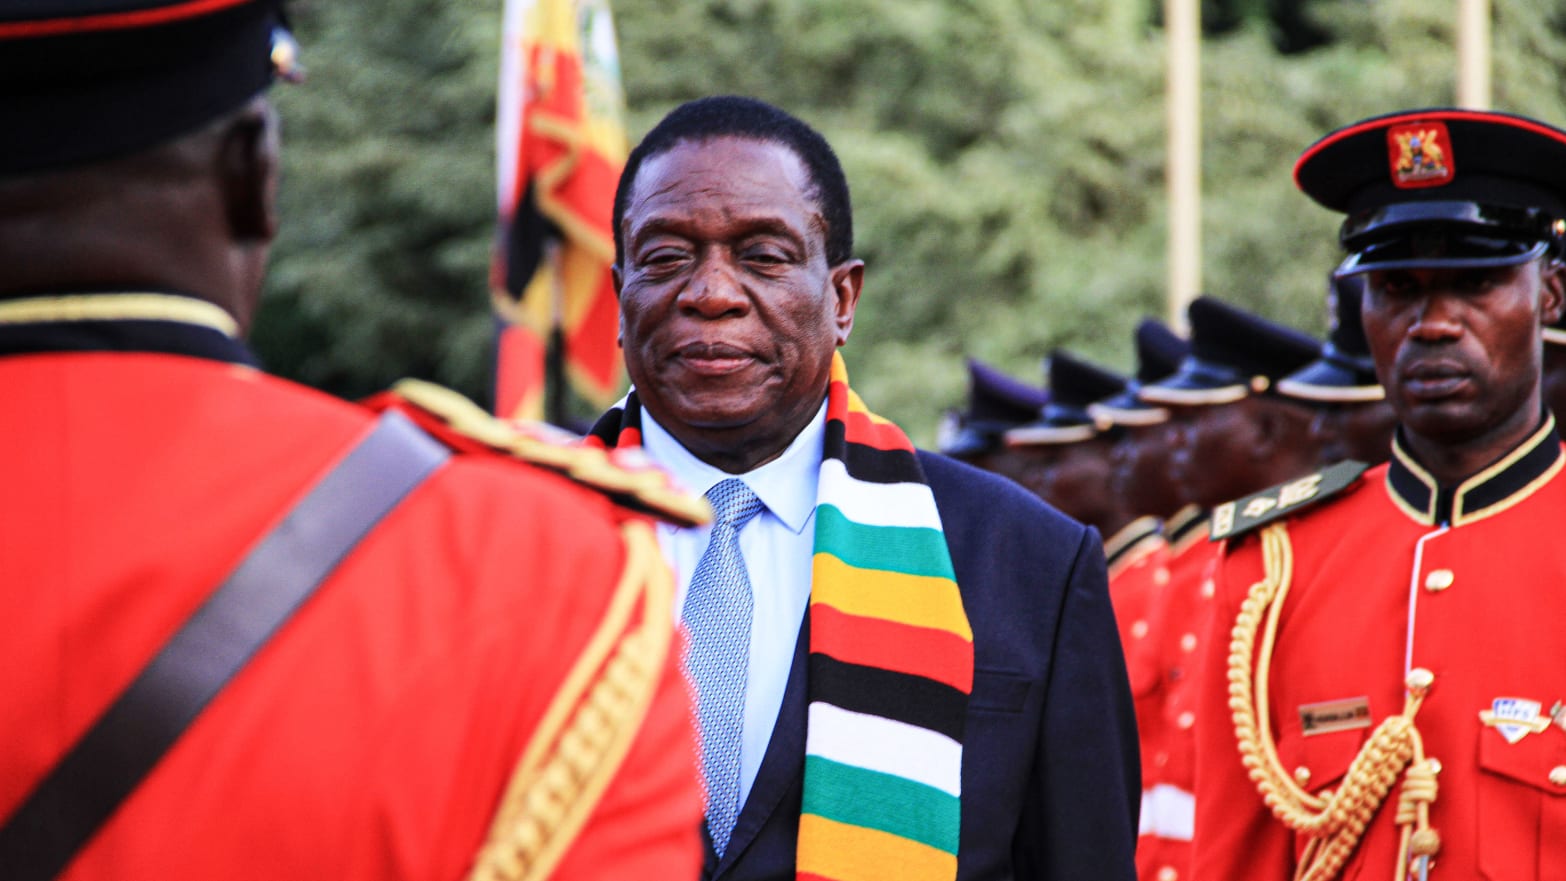 Zimbabwe's president Emmerson Mnangagwa (2nd L) reviews a guard of honour at the state house during his official visit to attend Uganda's 57th independence day in Entebbe, Uganda, on October 8, 2019